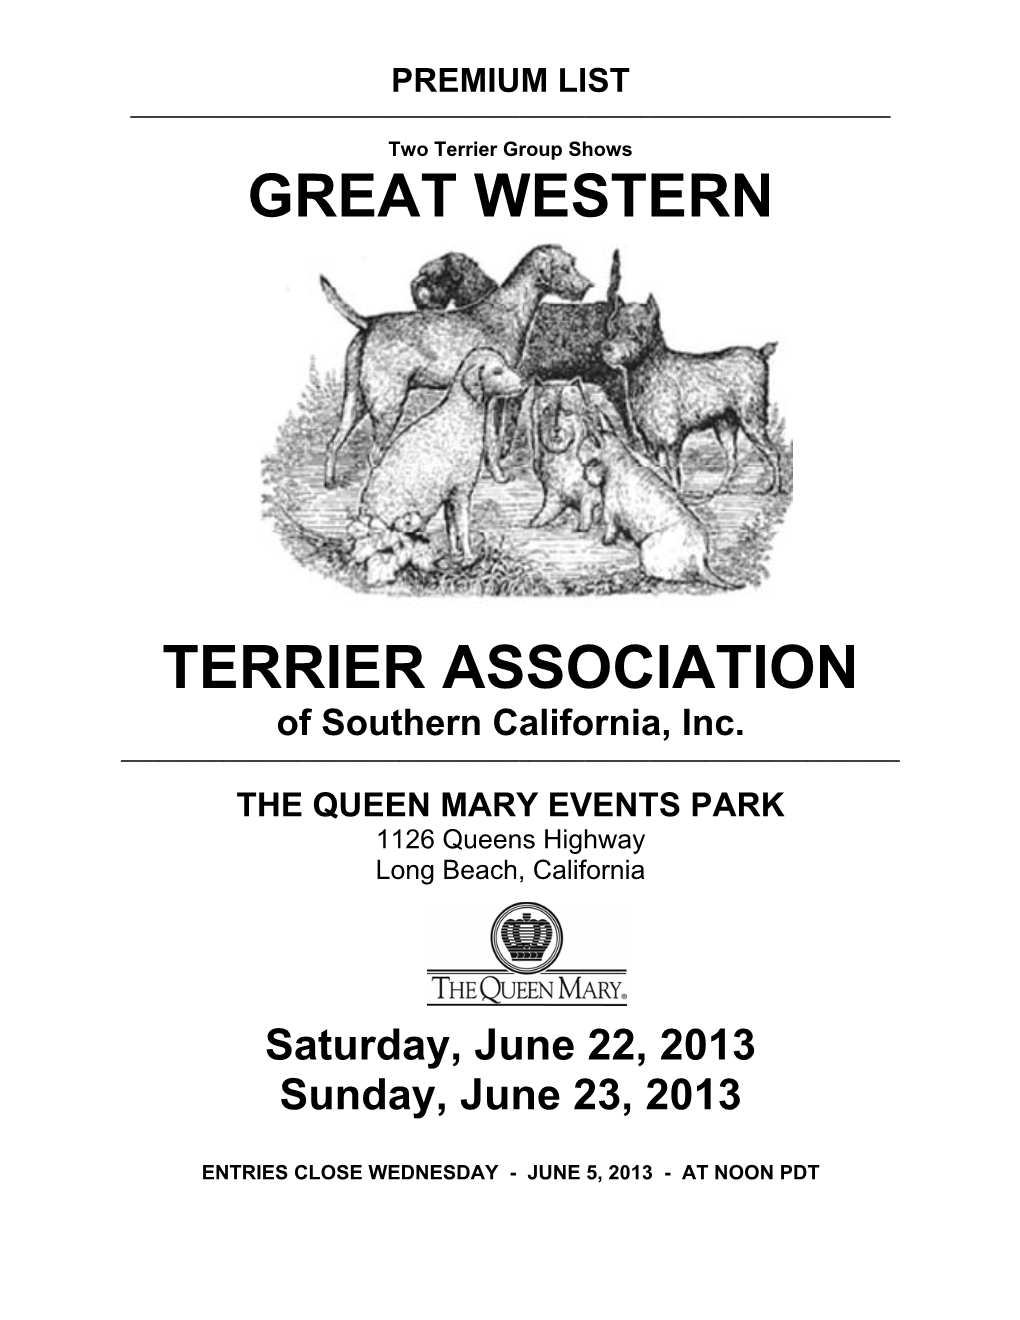 Great Western Terrier Association of Southern California, Inc